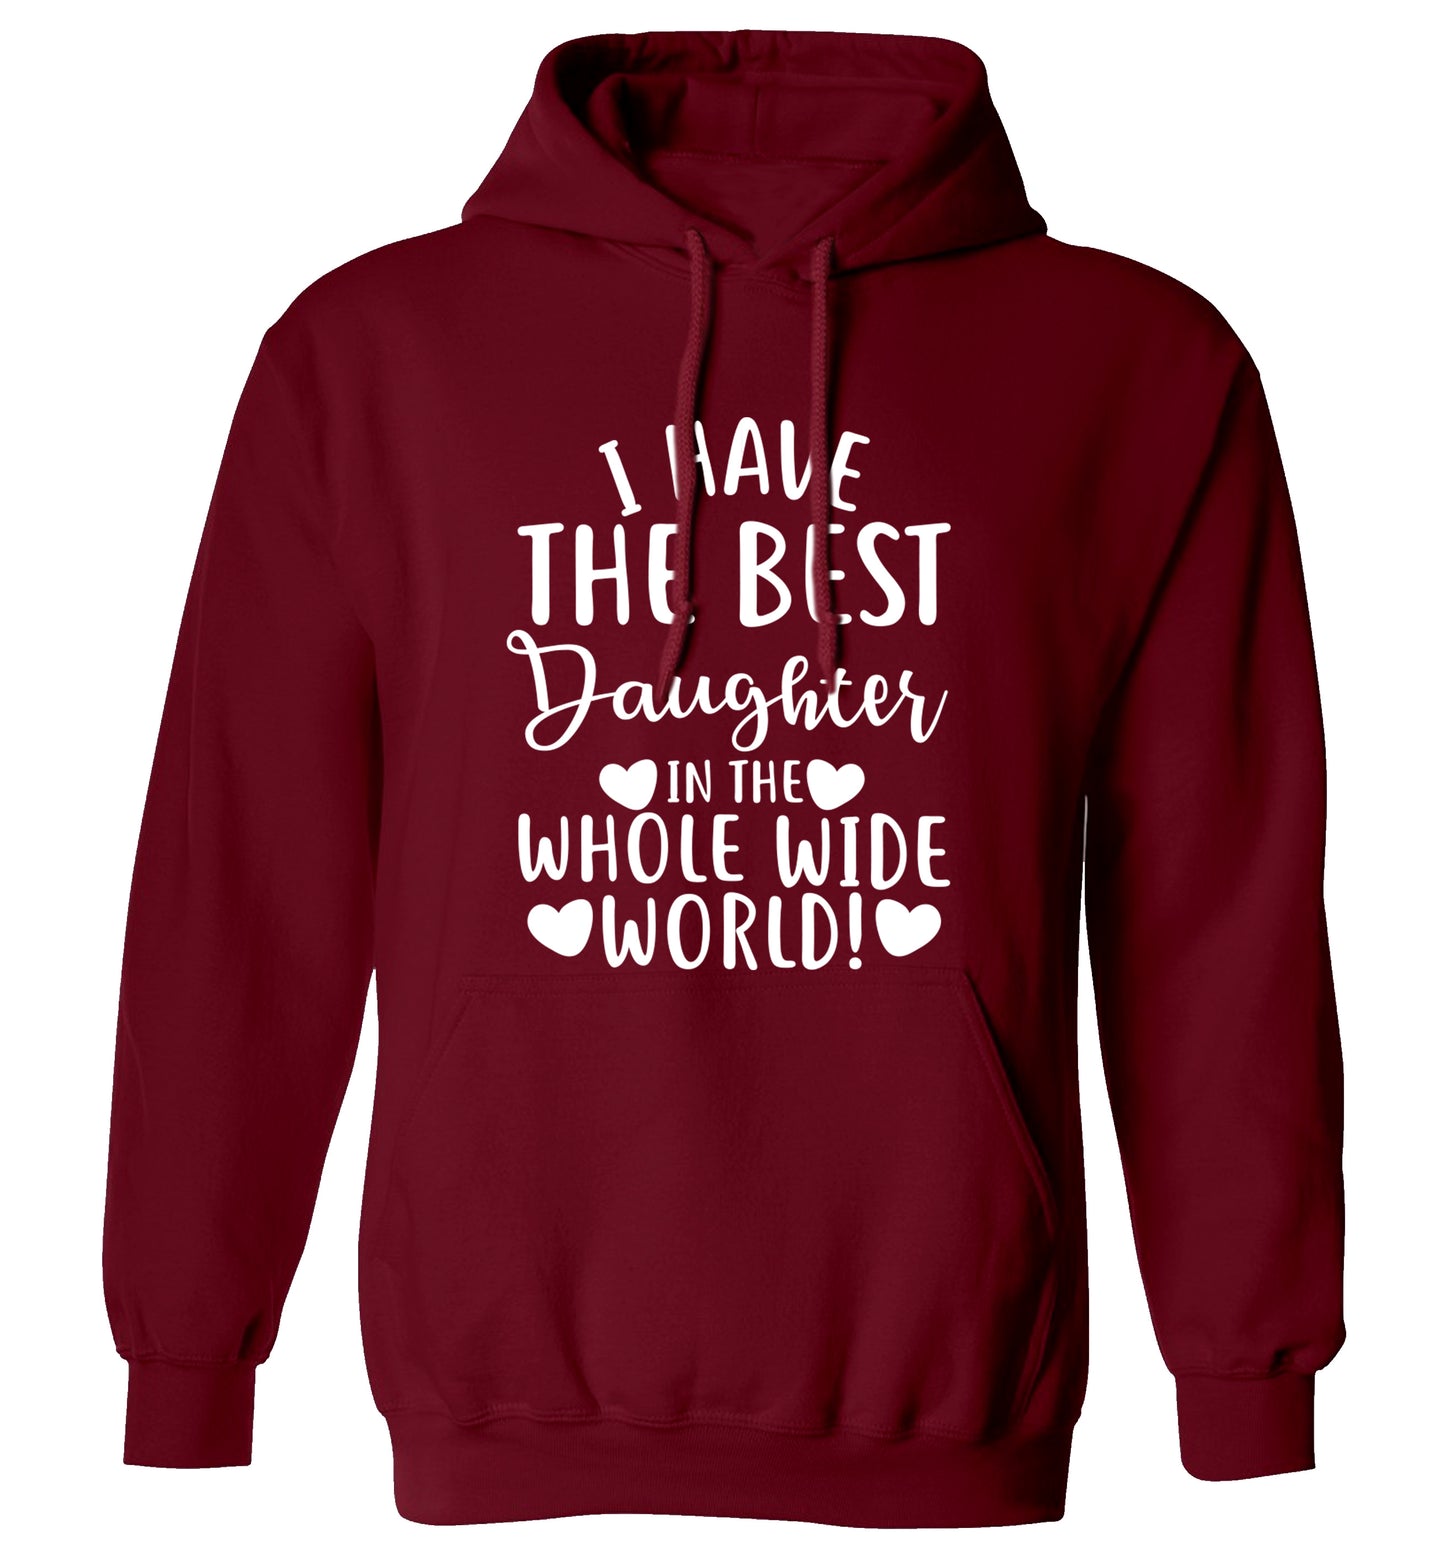 I have the best daughter in the whole wide world! adults unisex maroon hoodie 2XL